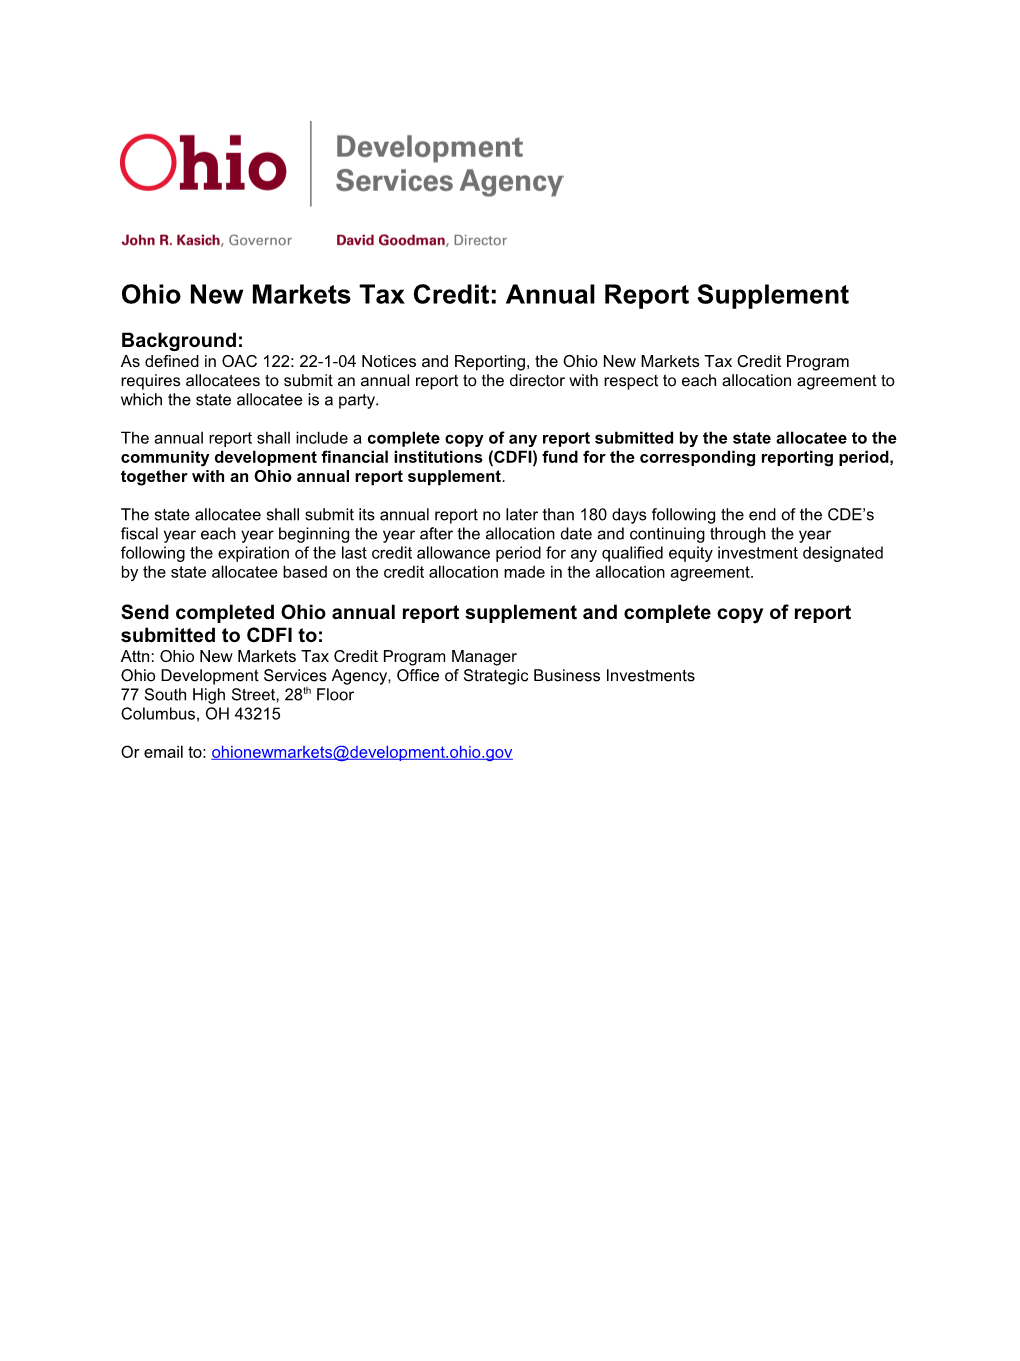 Ohio New Markets Tax Credit: Annual Report Supplement